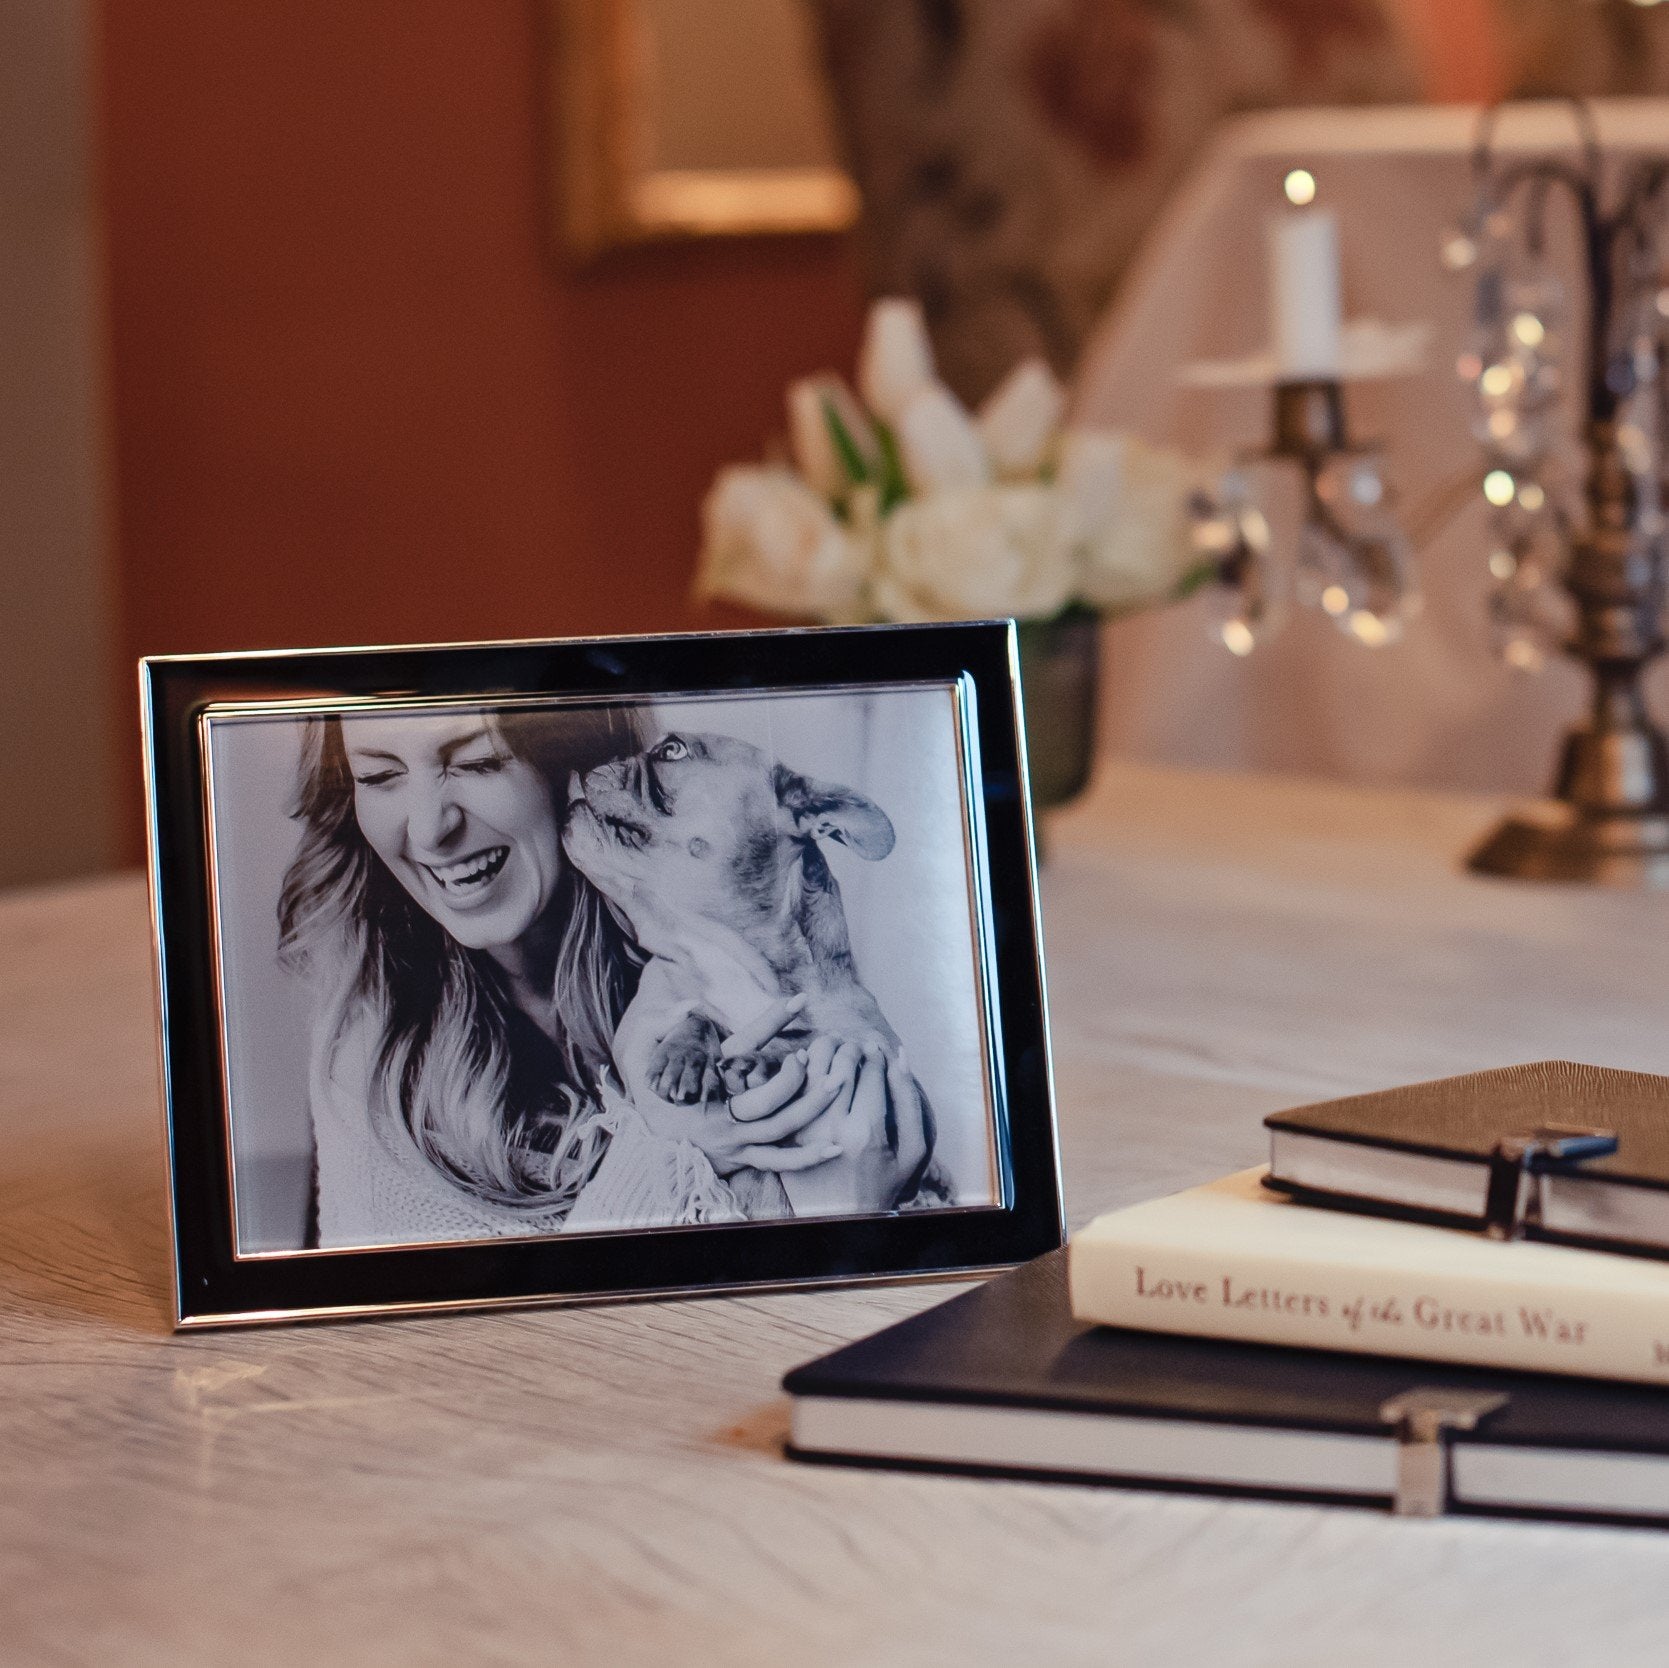 5x7 Signature Picture Frame – Gaines Jewelers